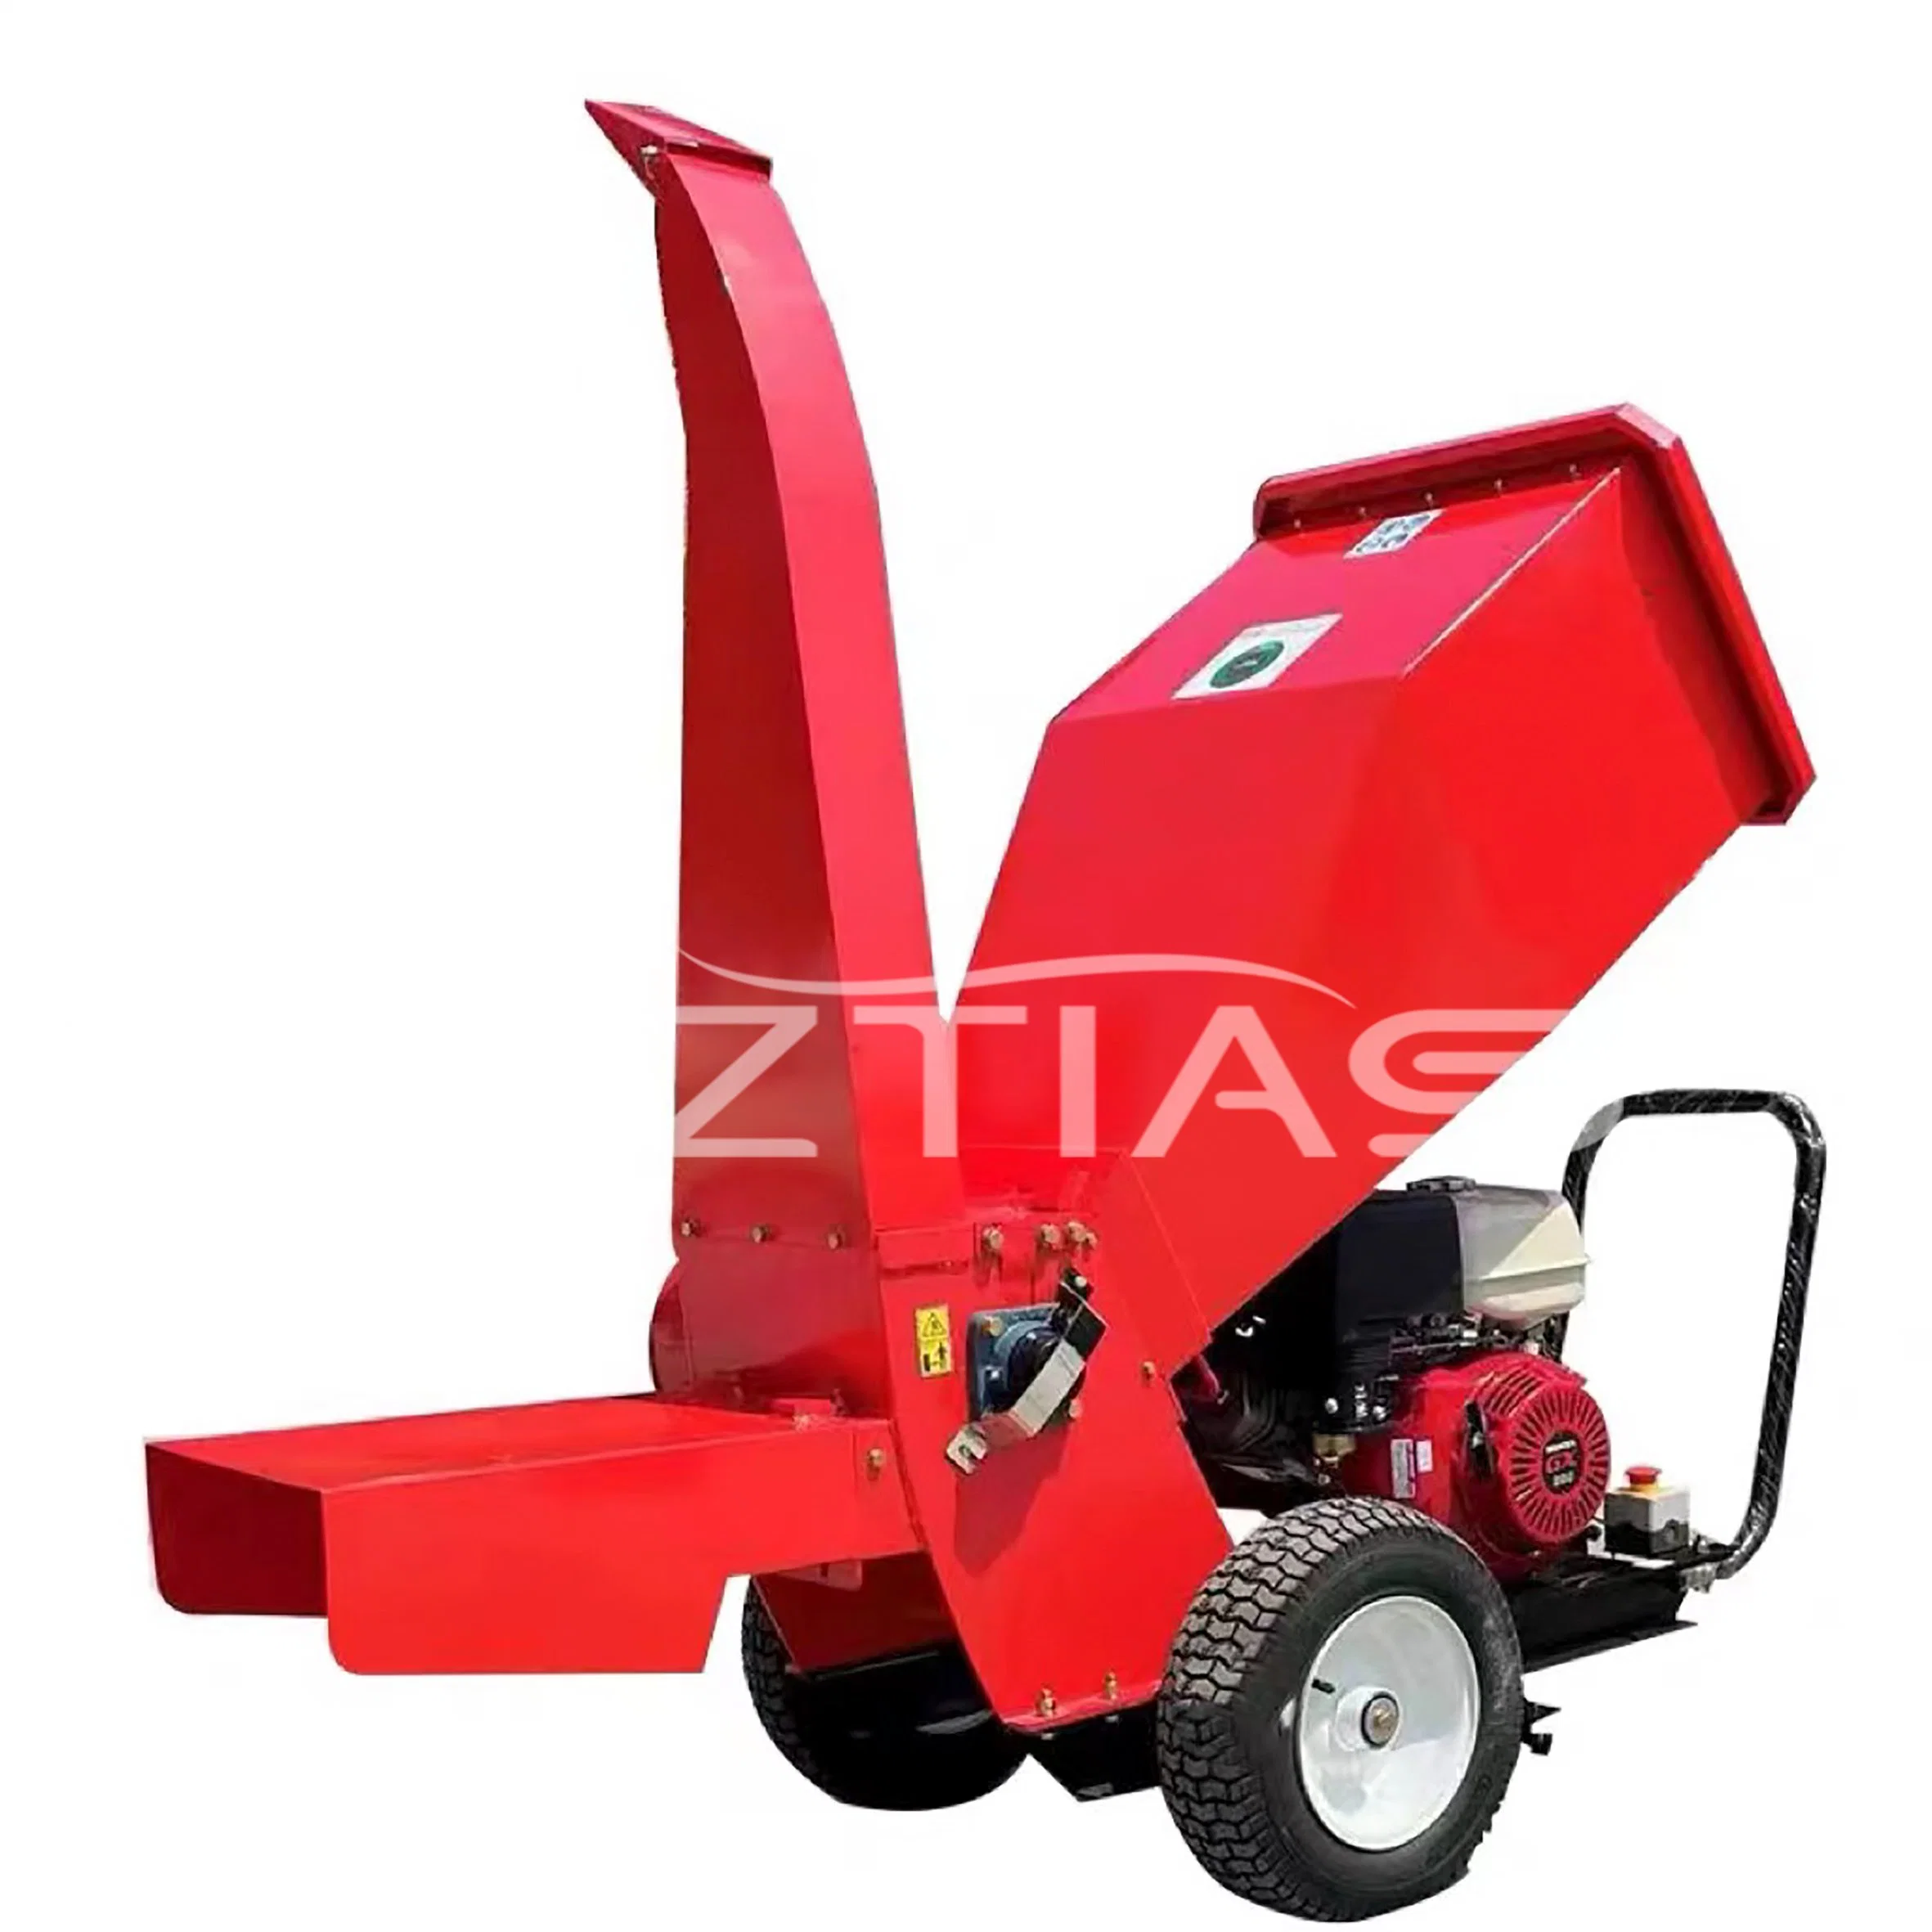 Garden Tree Branch Crusher Machine Chipper Shredder for Sale Electric Wood Power Origin Cutting Type Speed Product Min Place